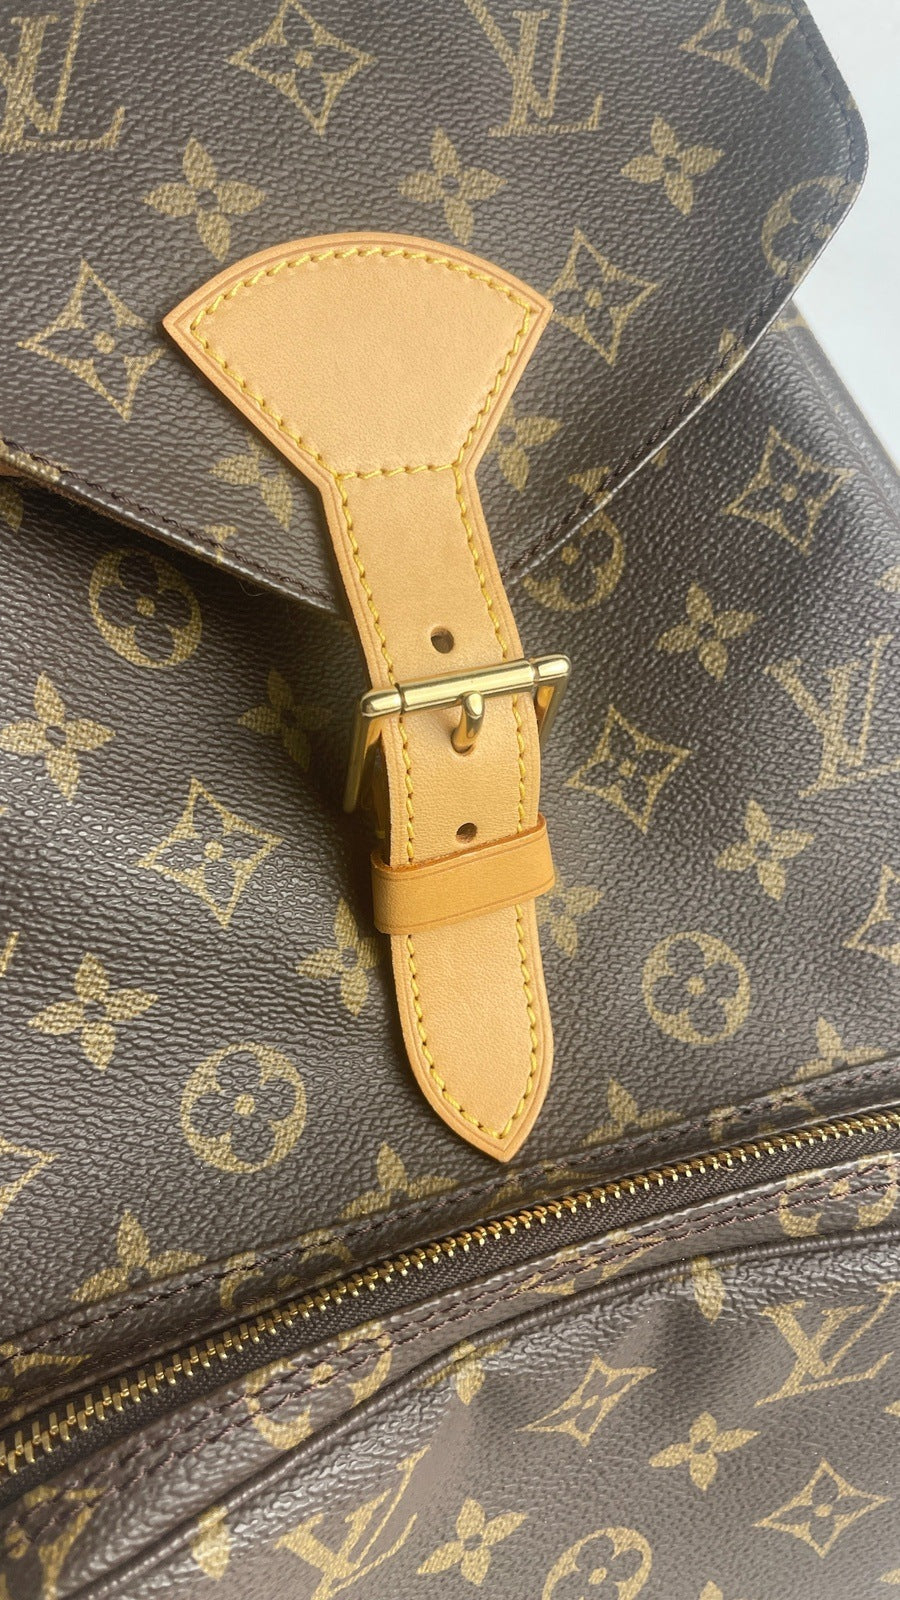 Louis Vuitton very one handle bag in rubios limited edition reversible strap